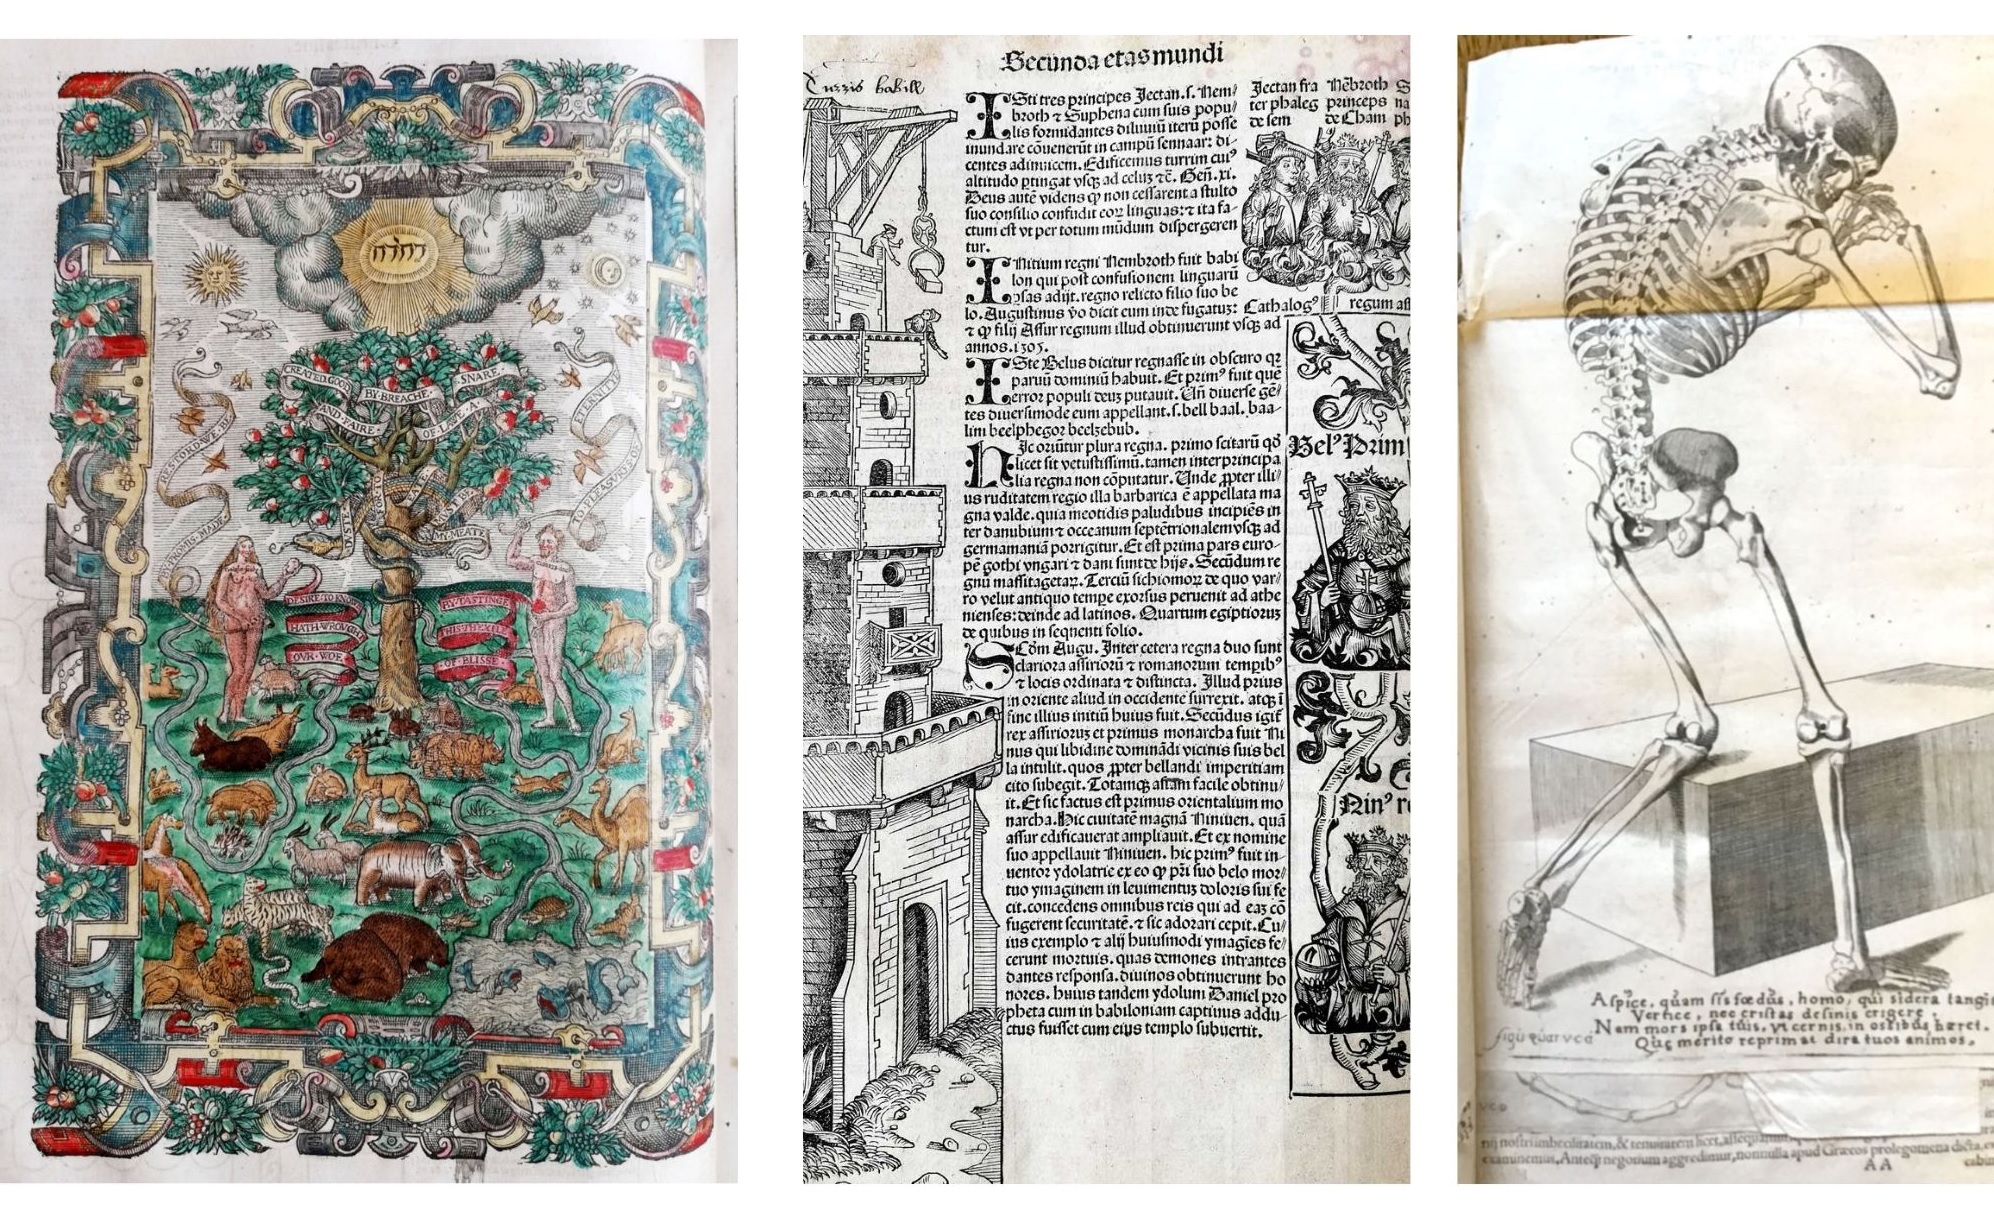 A selection of pages depicting colourful images, including a skeleton